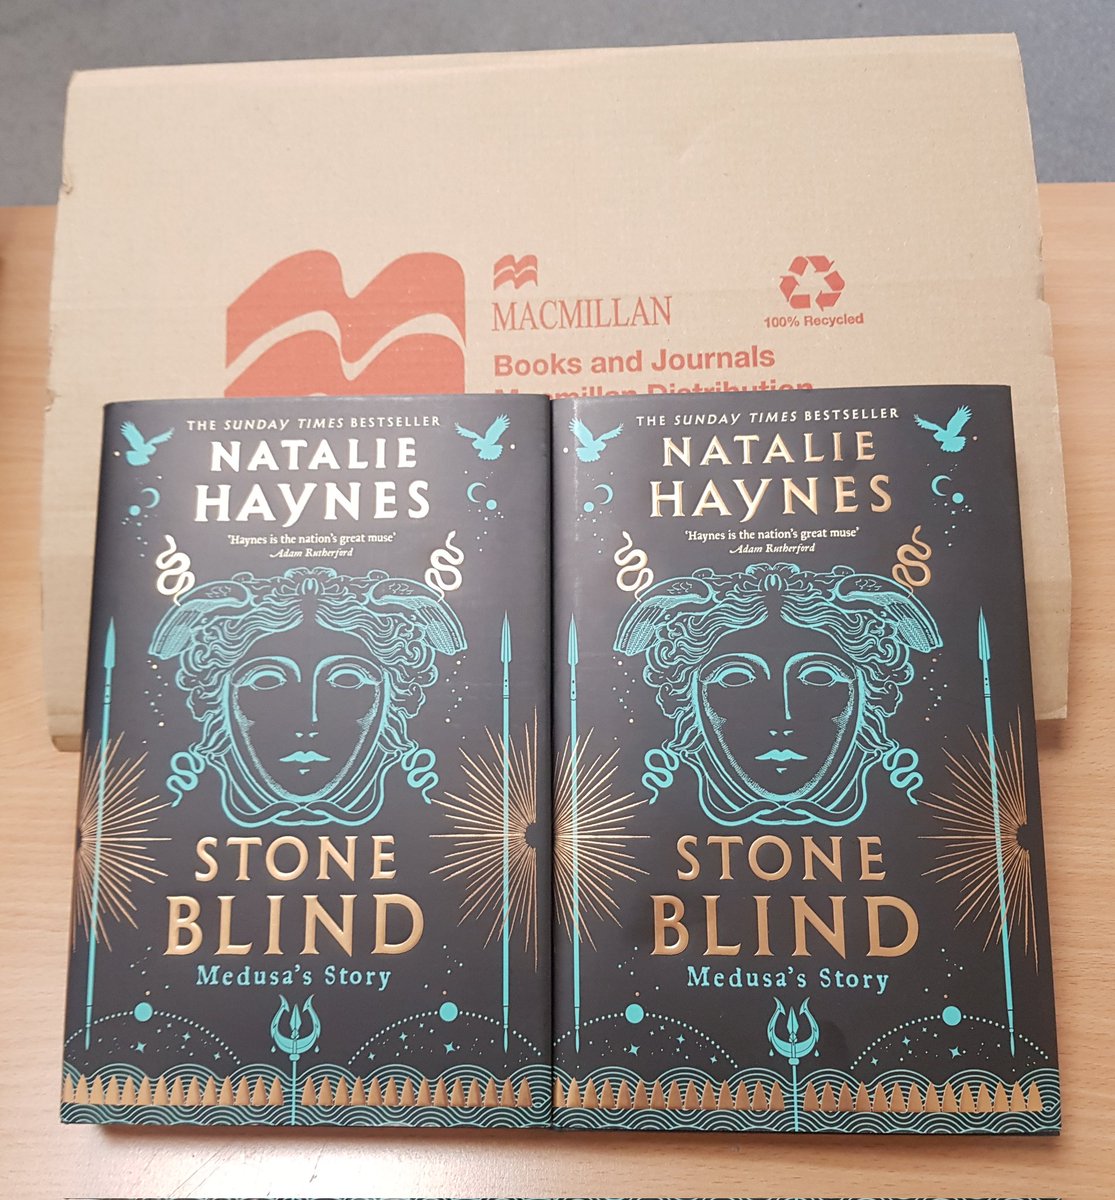 Thank you @panmacmillan for this unexpected gift of #StoneBlind by @officialnhaynes. I am very grateful! What a great way to end a very busy teaching week. Kelmscotties- come to Rm 103 if you want to borrow this fantastic book. 😍 #ClassicsTwitter #TeachClassics